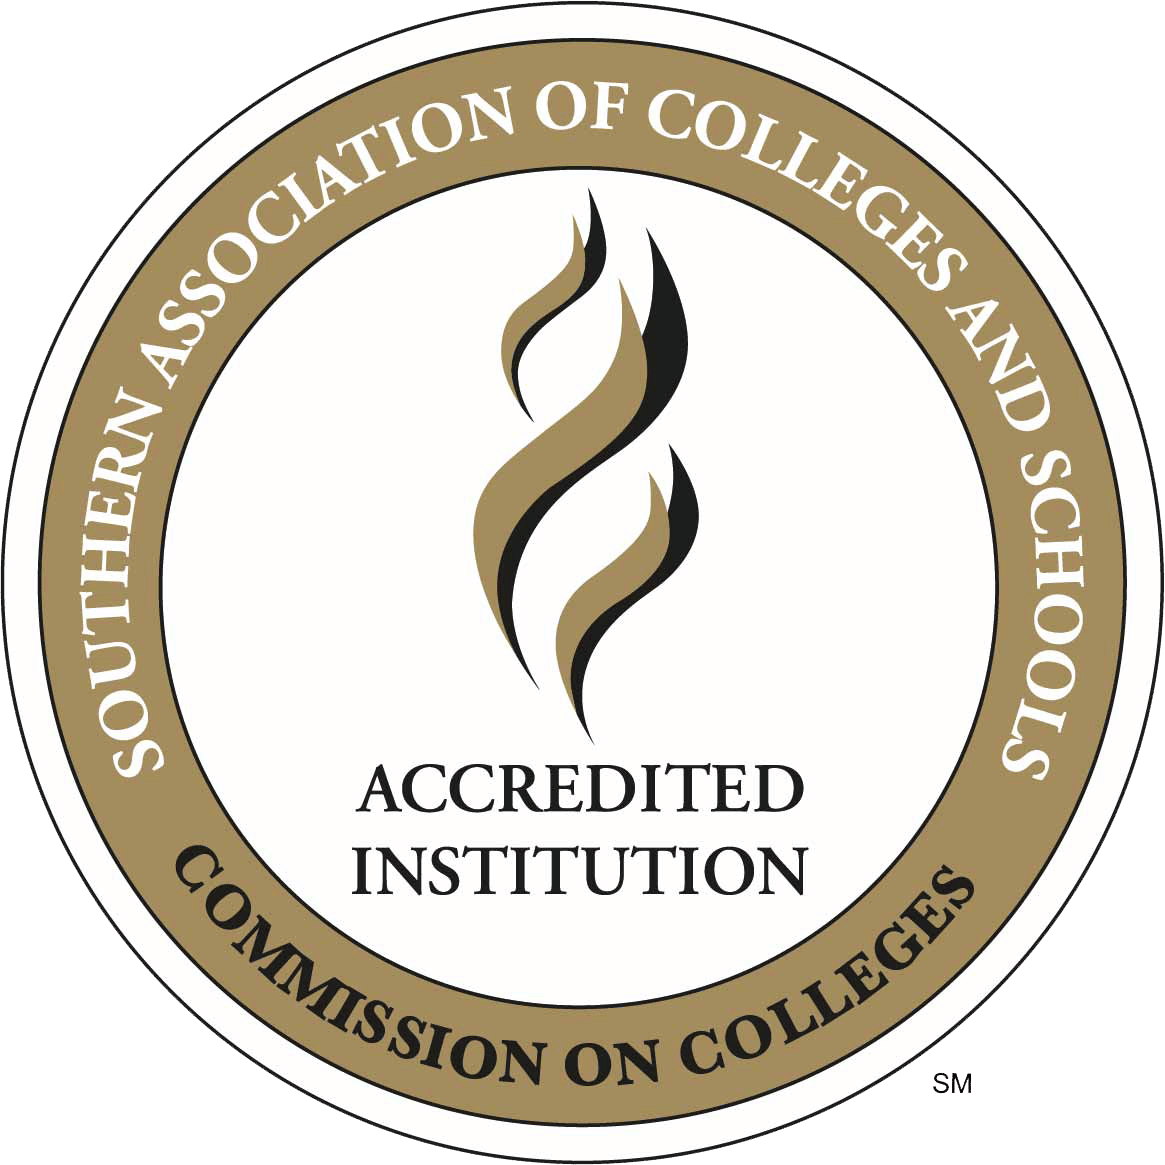 Seal of accreditation by the Southern Association of Colleges and Schools Commission on Colleges for Howard Payne University. | HPU